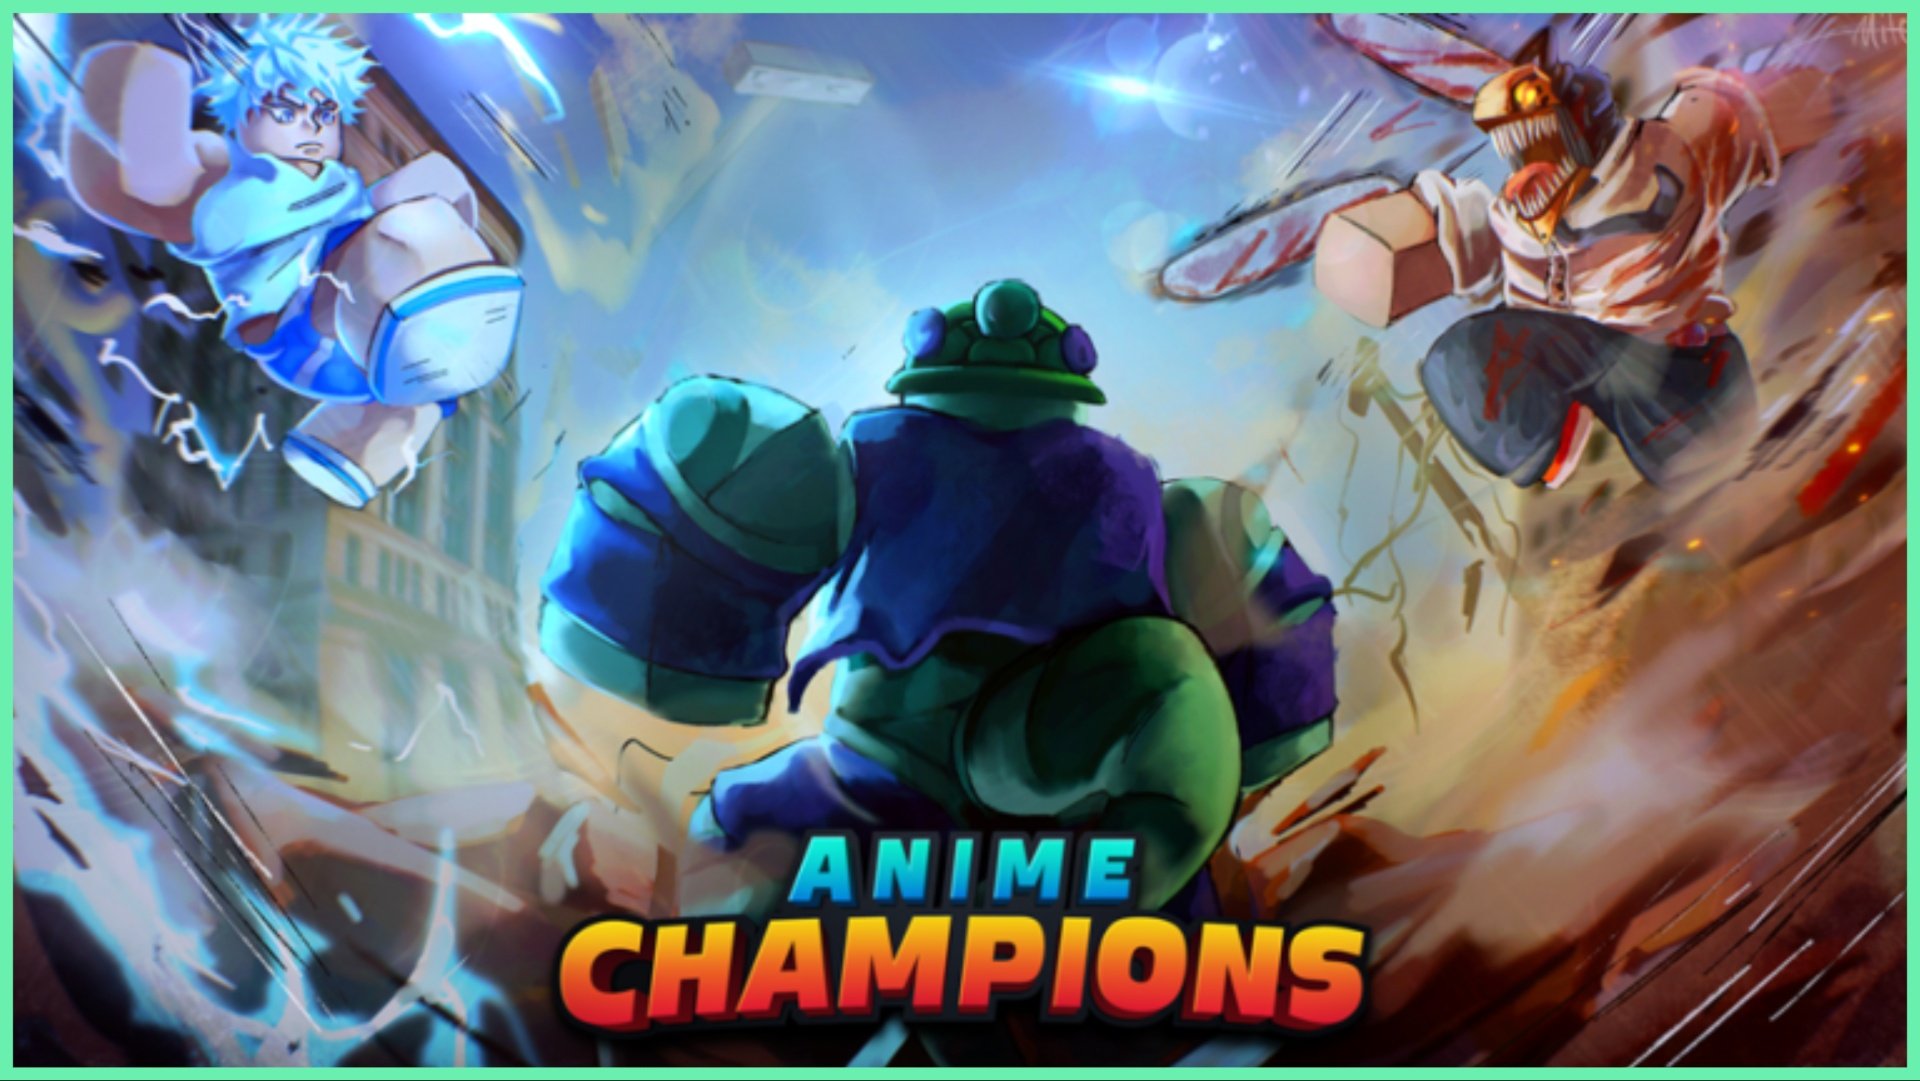 How To Use The Devourer Crystals – Anime Champions Simulator